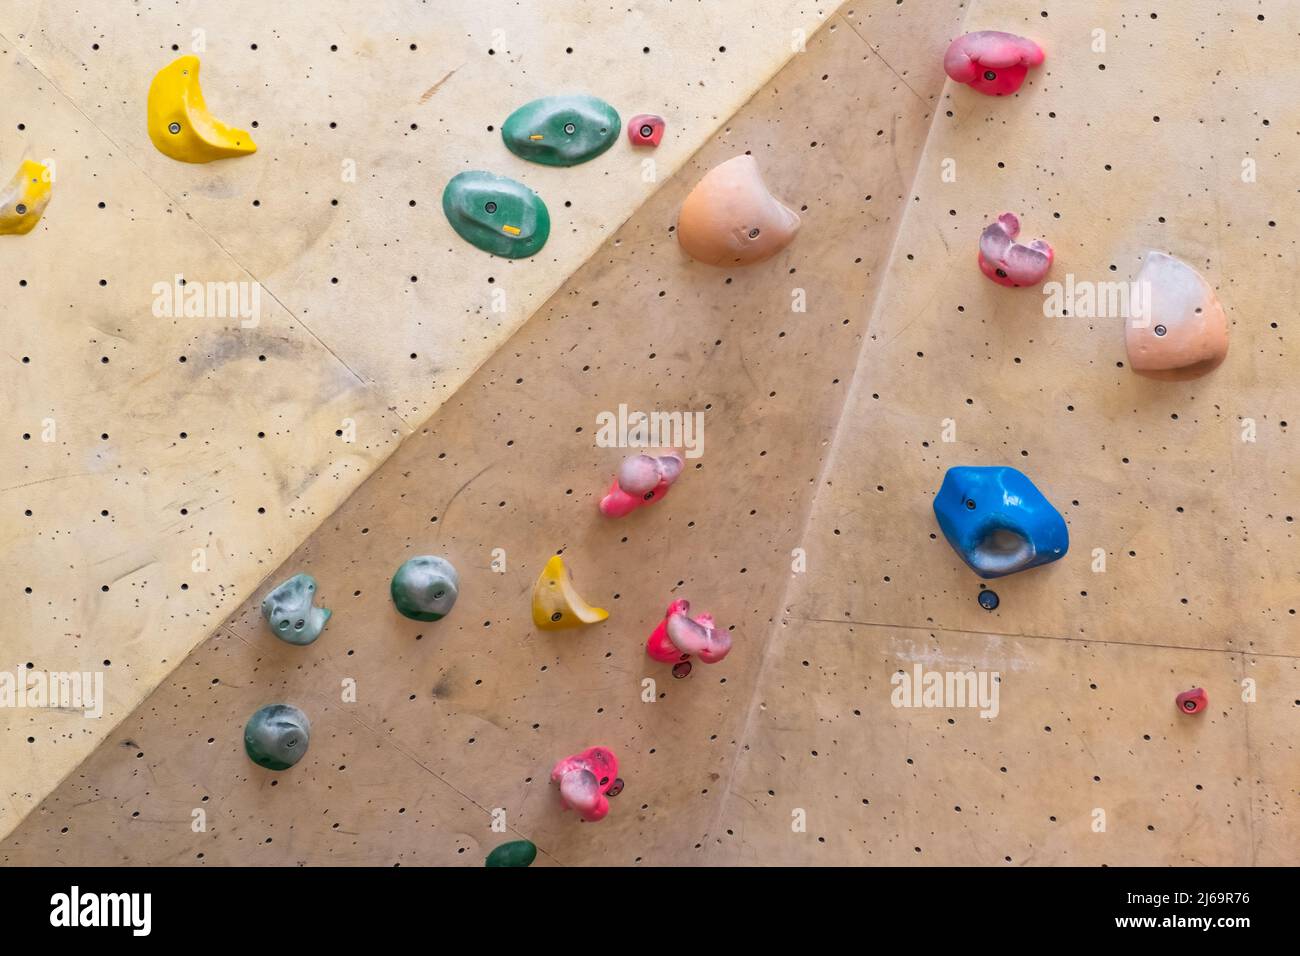 Artificial rock climbing wall with various colored grips. Stock Photo